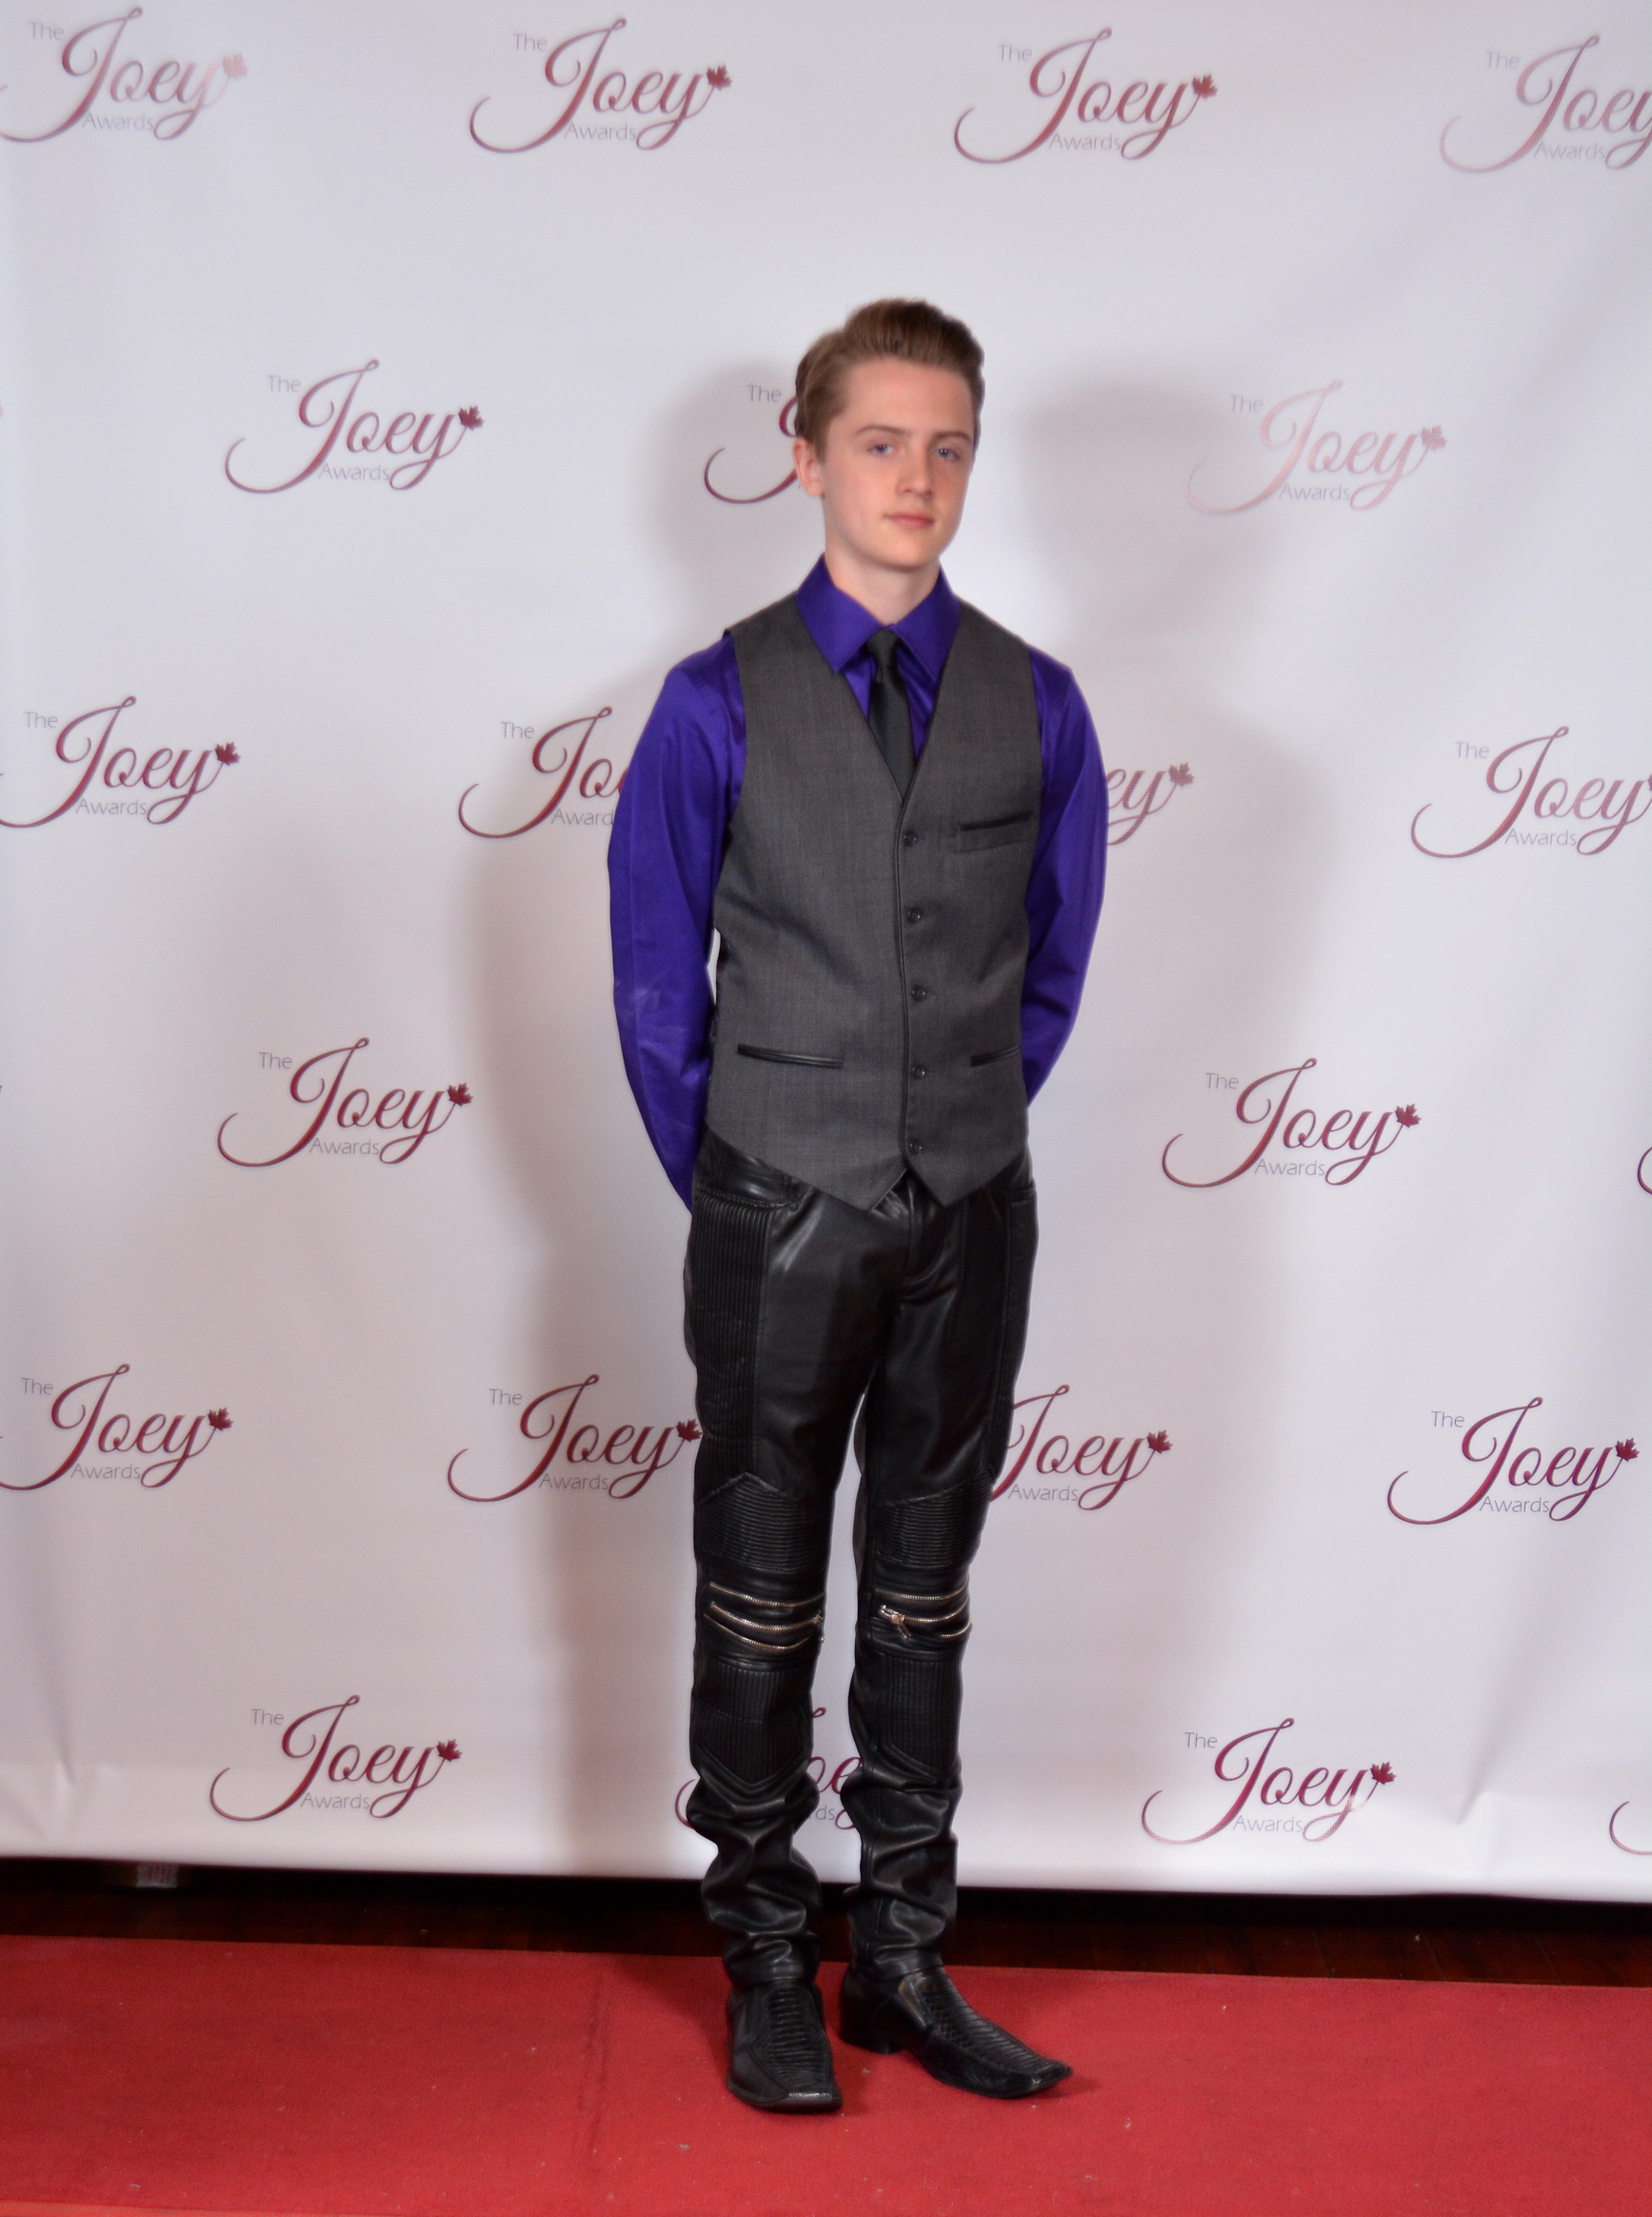 Jadon walking the red carpet at the 2014 Joey Awards in Vancouver